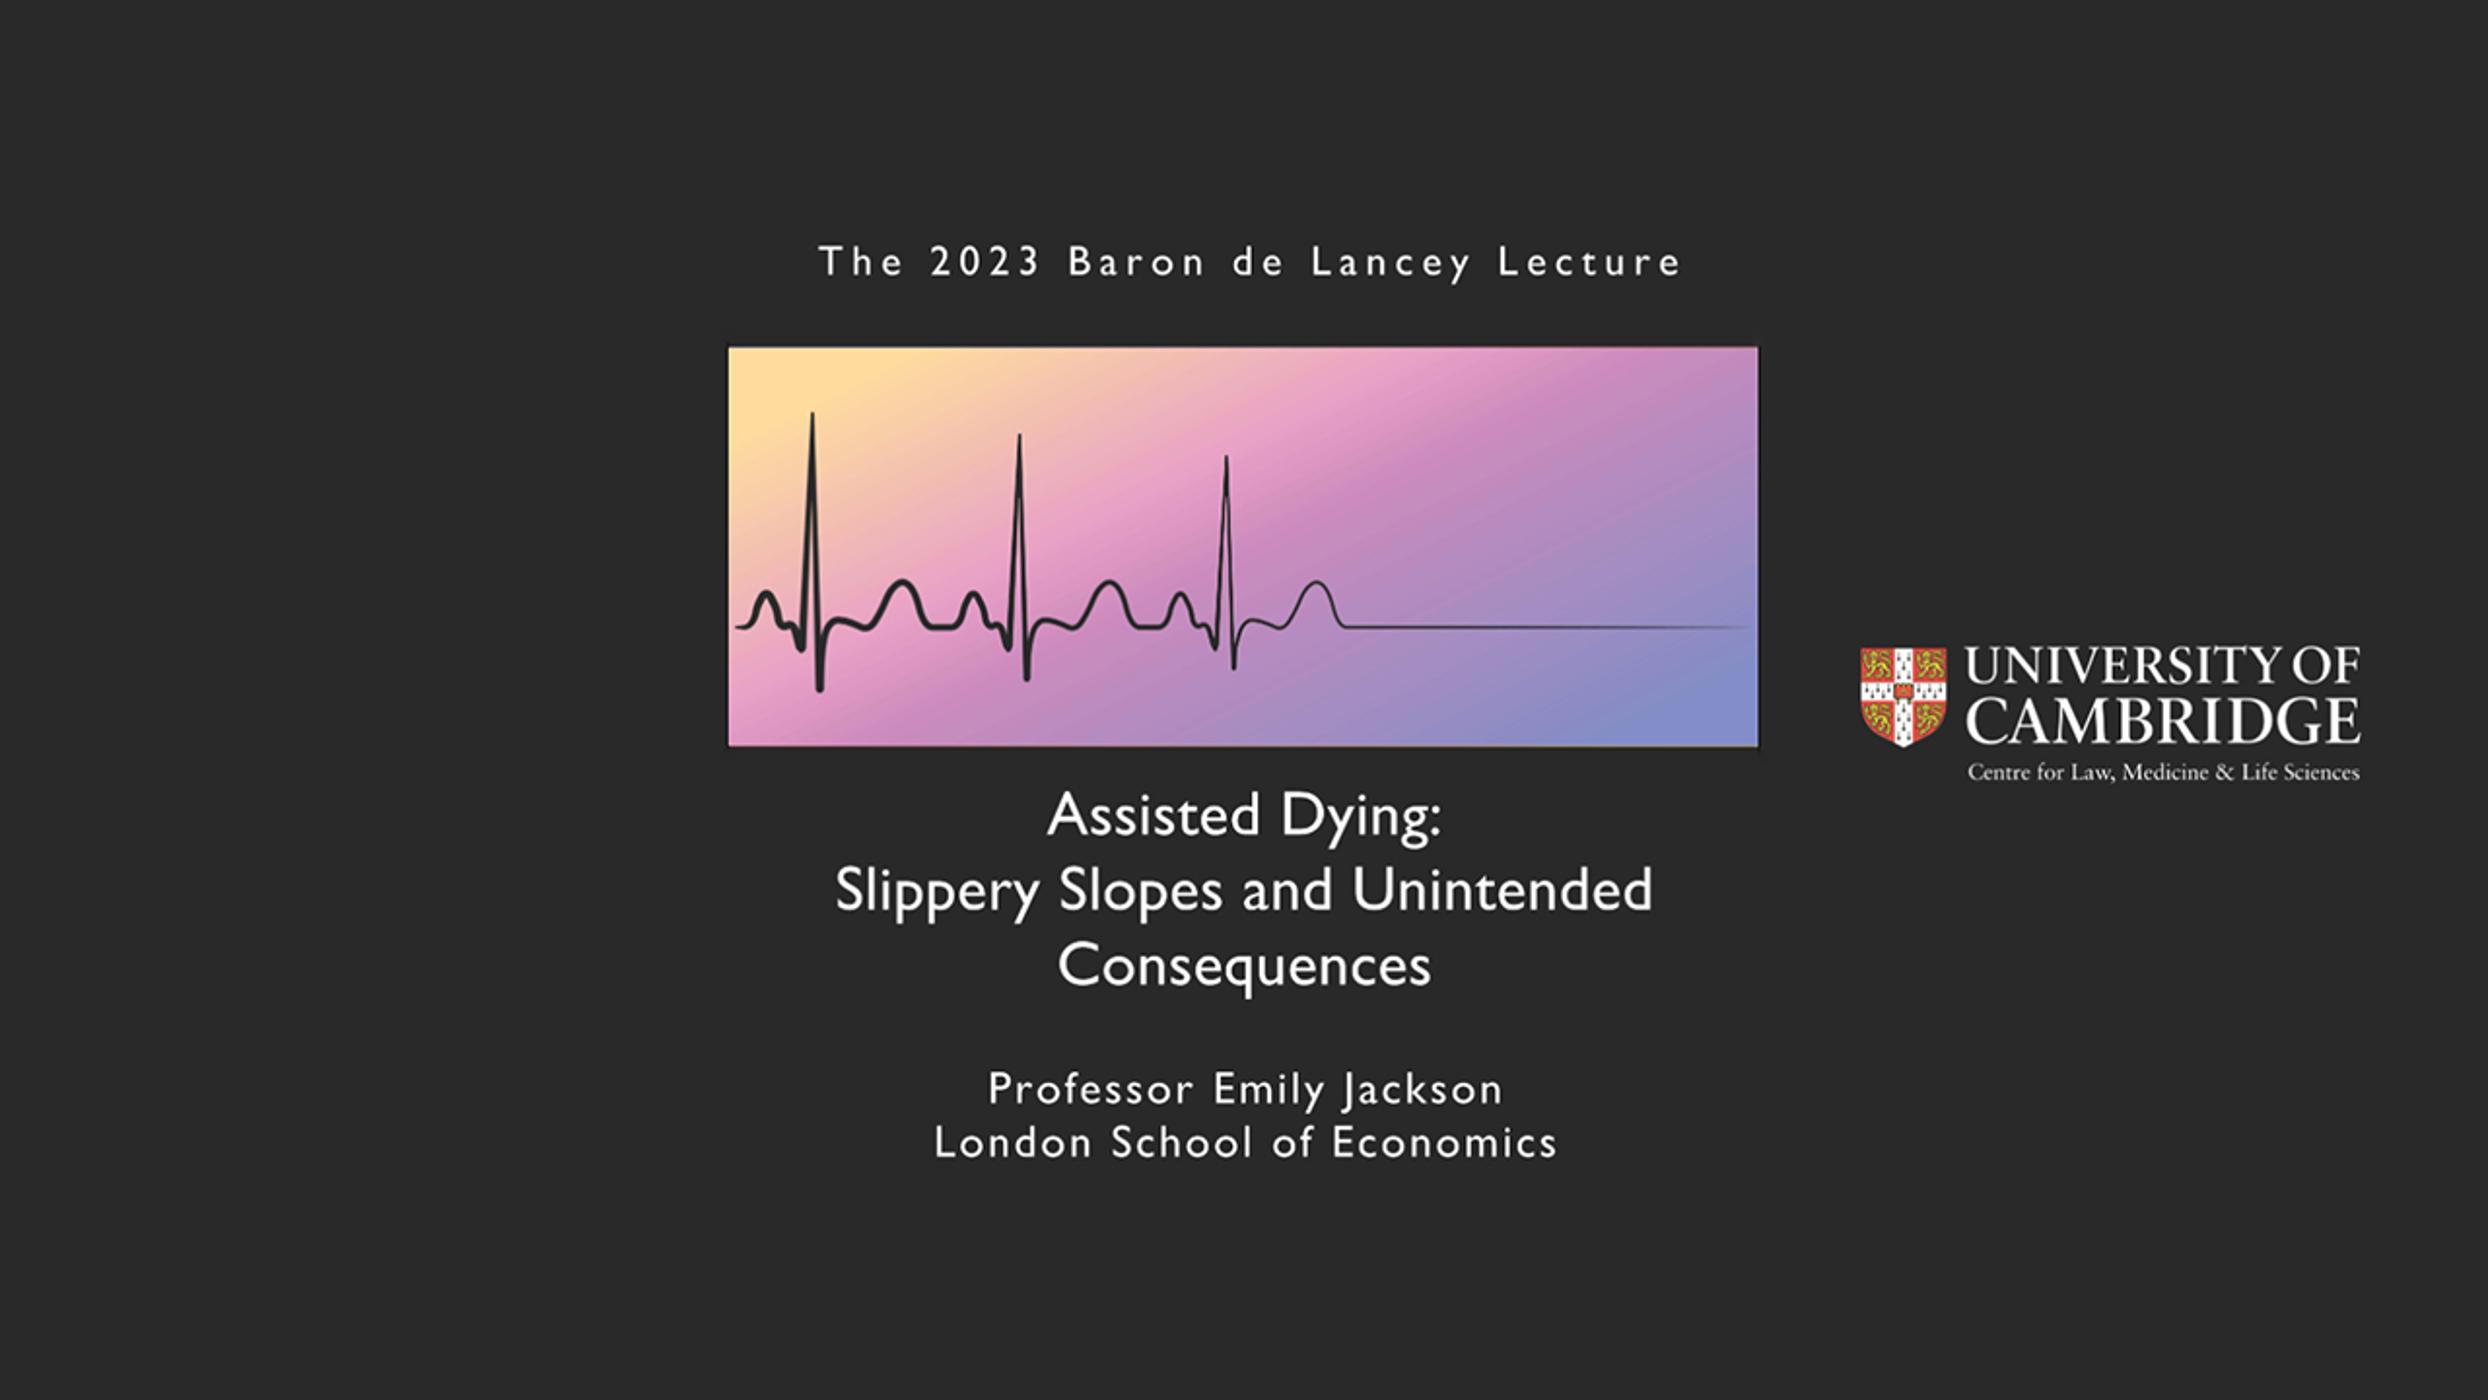 ’Assisted Dying: Slippery Slopes and Unintended Consequences’: The Baron de Lancey Lecture 2023 (audio)